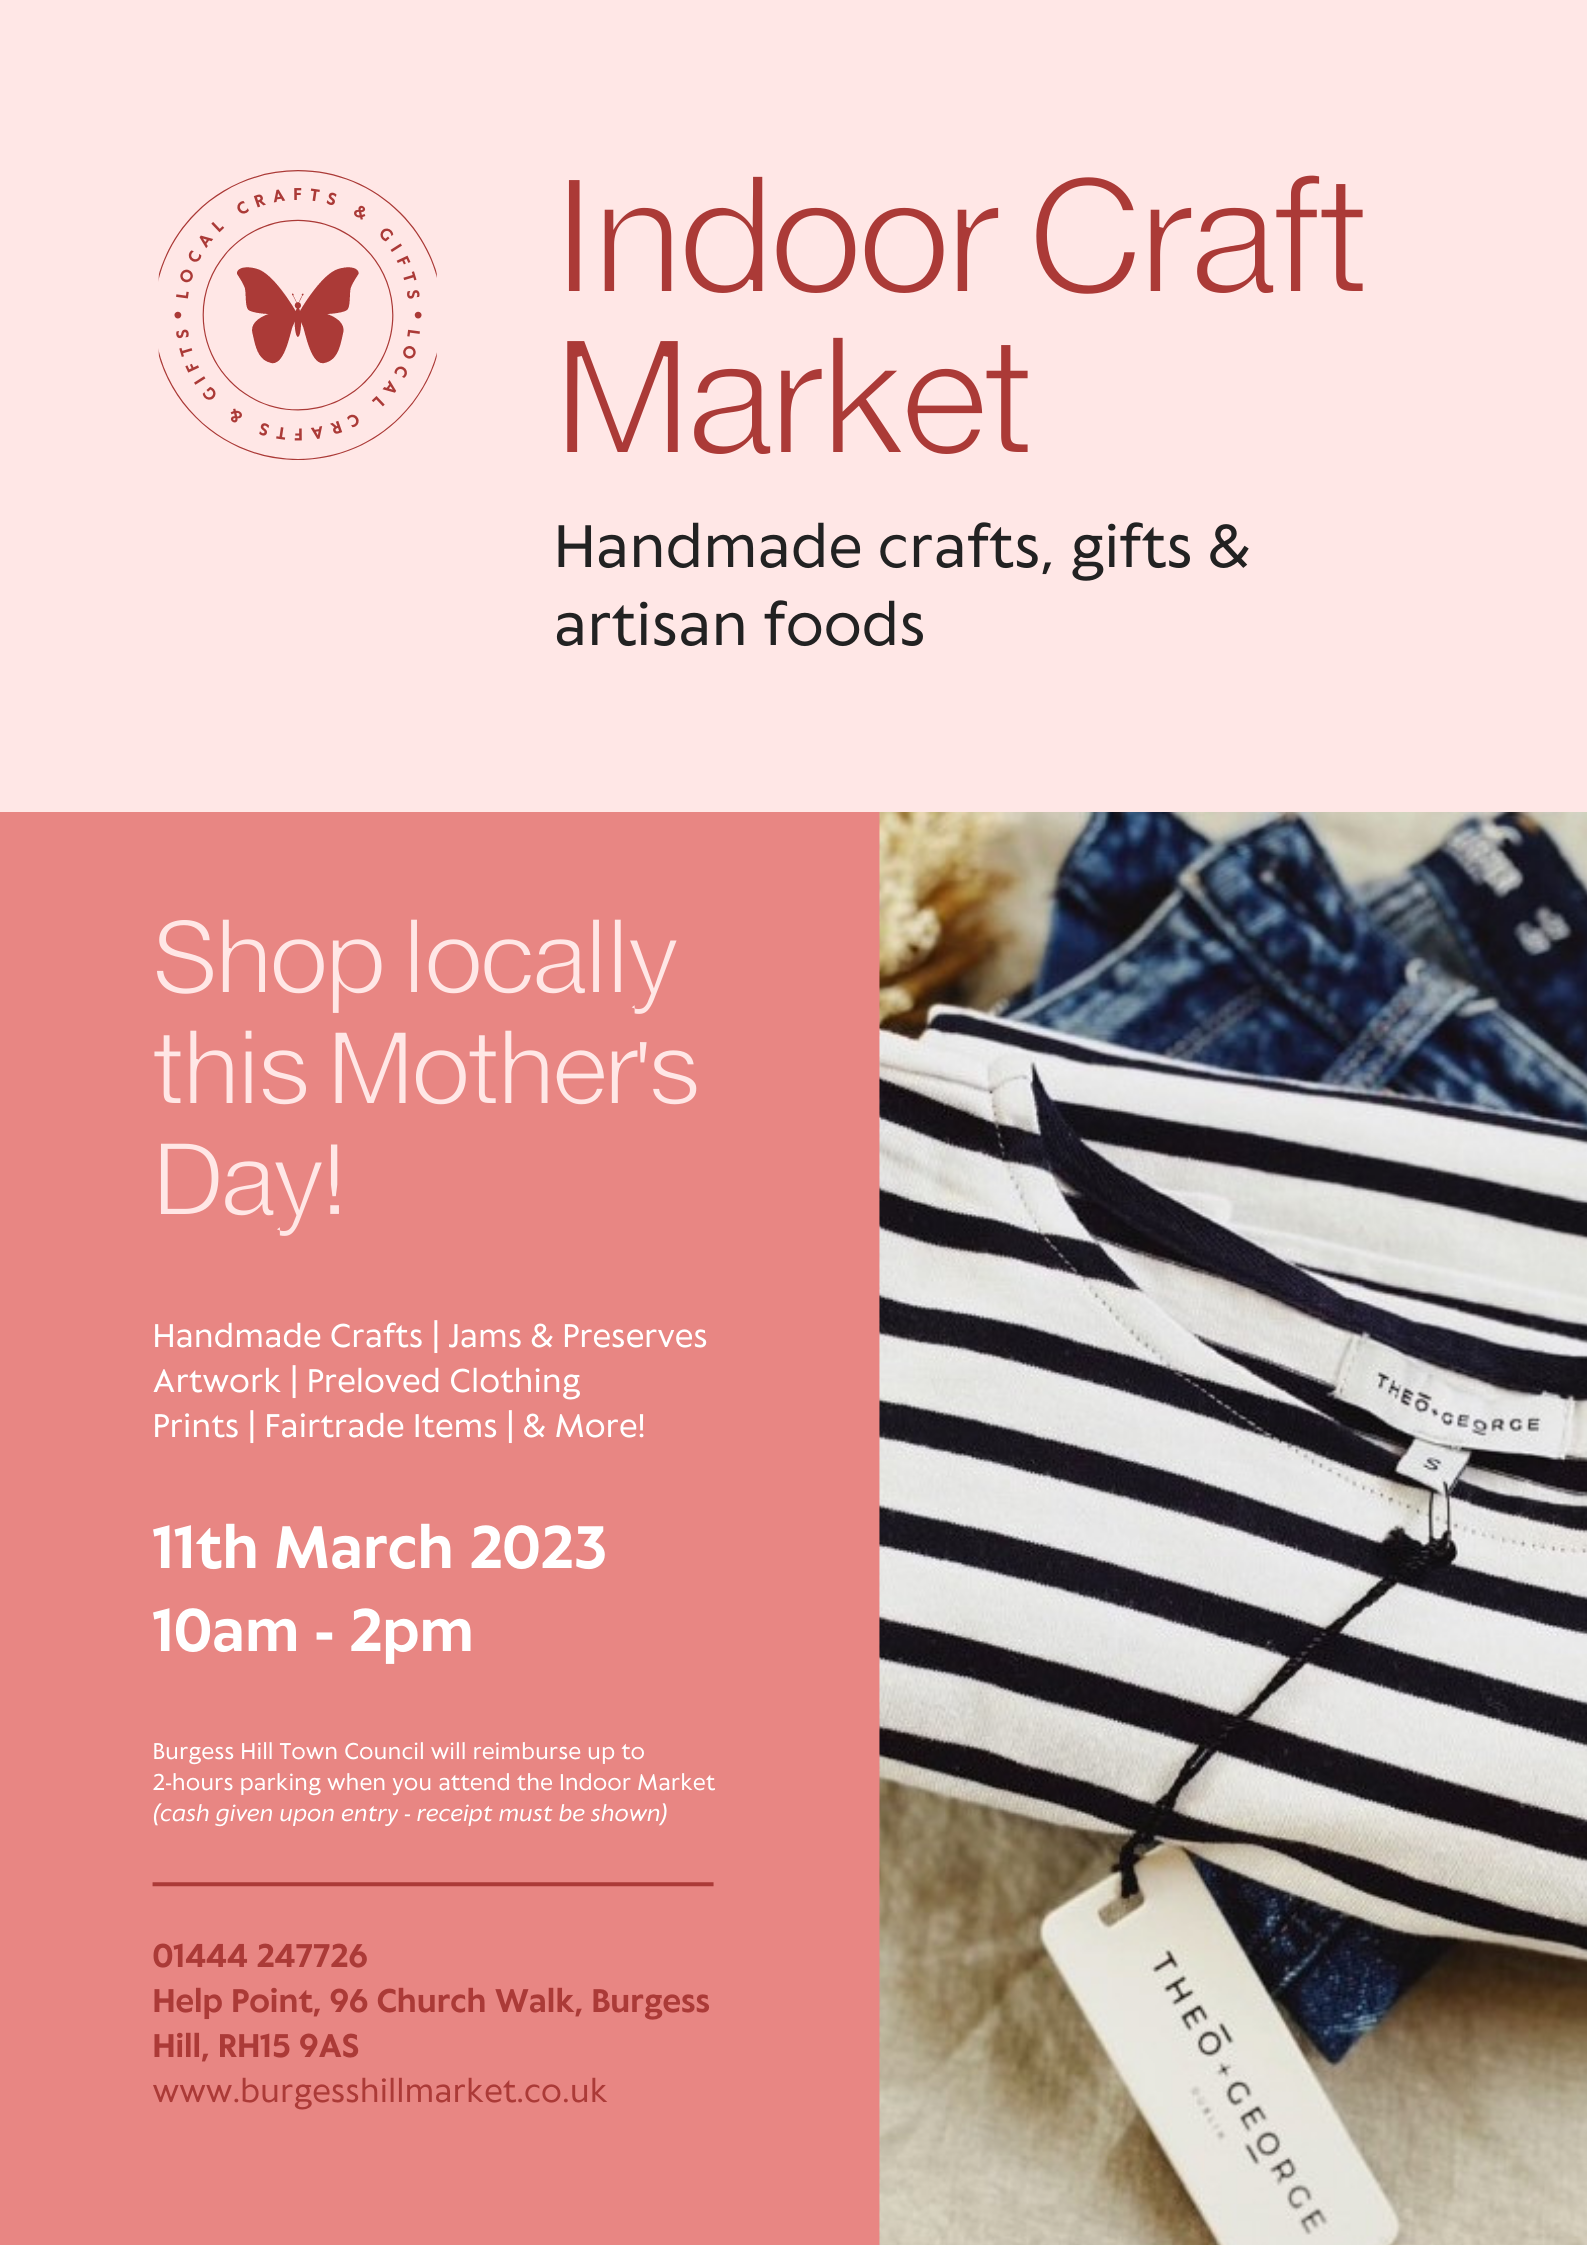 Indoor Craft Market – Shop locally this Mother’s Day!